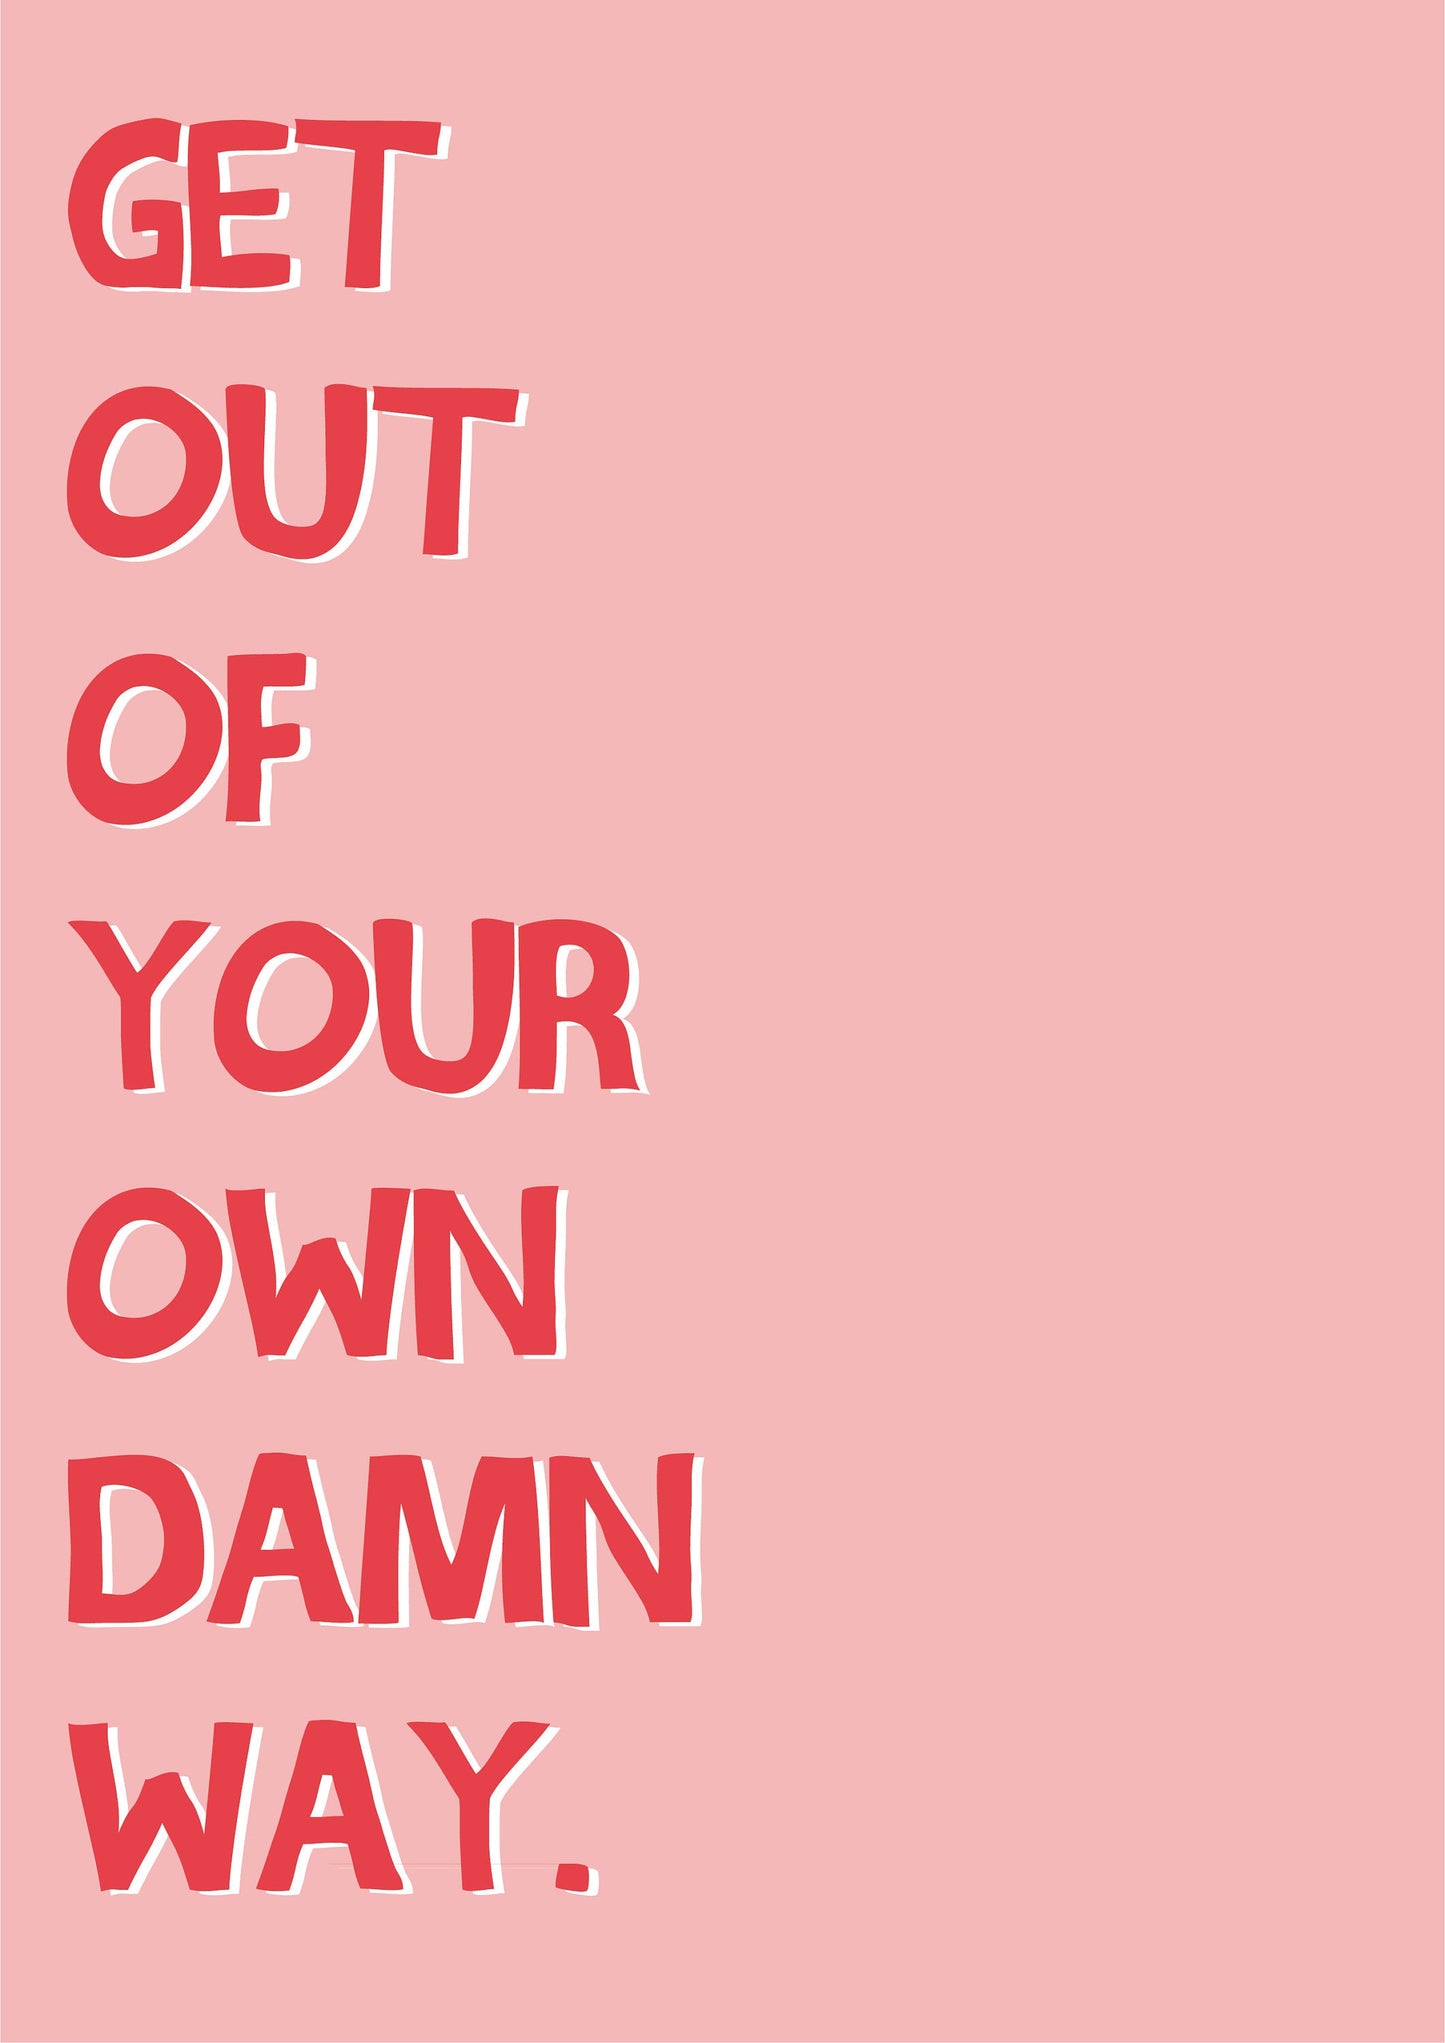 Get Out of Your Own Damn Way Funny Quote Print